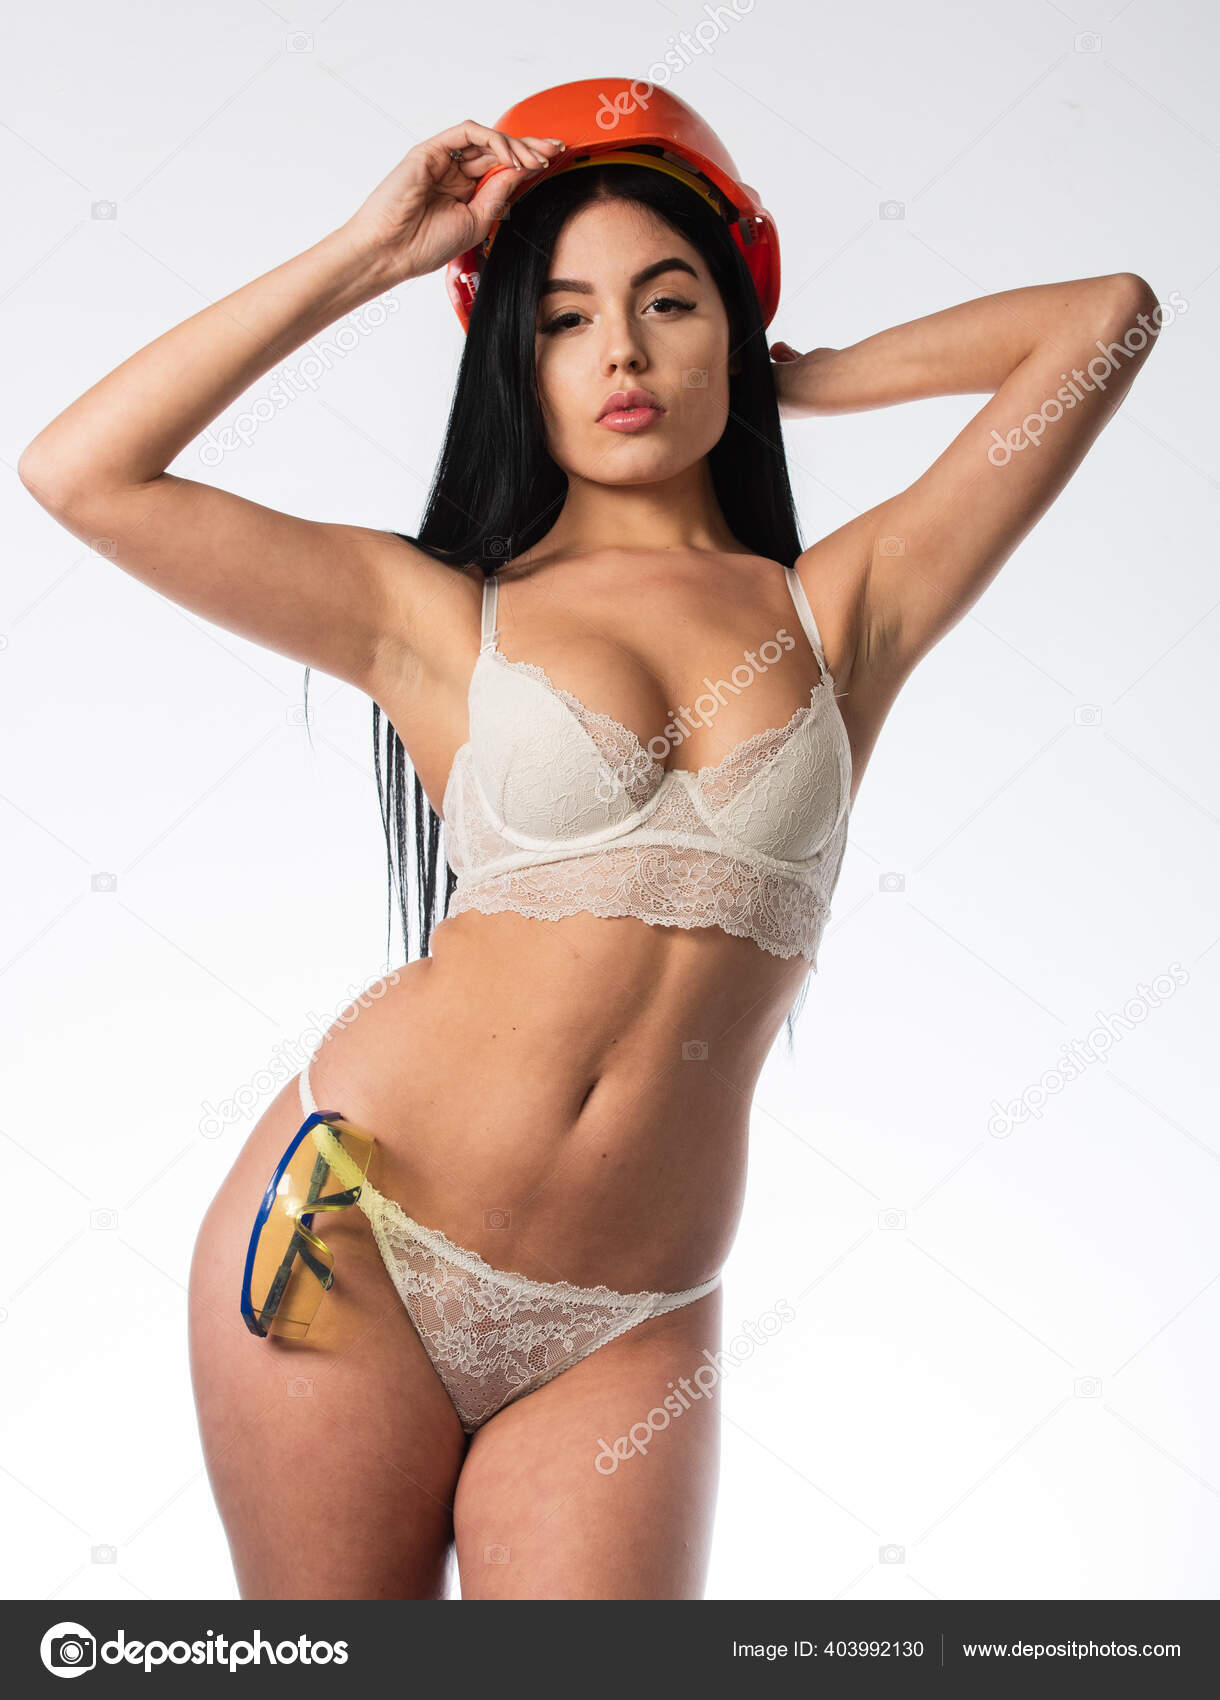 Build your ideal body. sexy woman in erotic lingerie and hard hat. summer and underwear female fashion. under protection. prevention concept pic